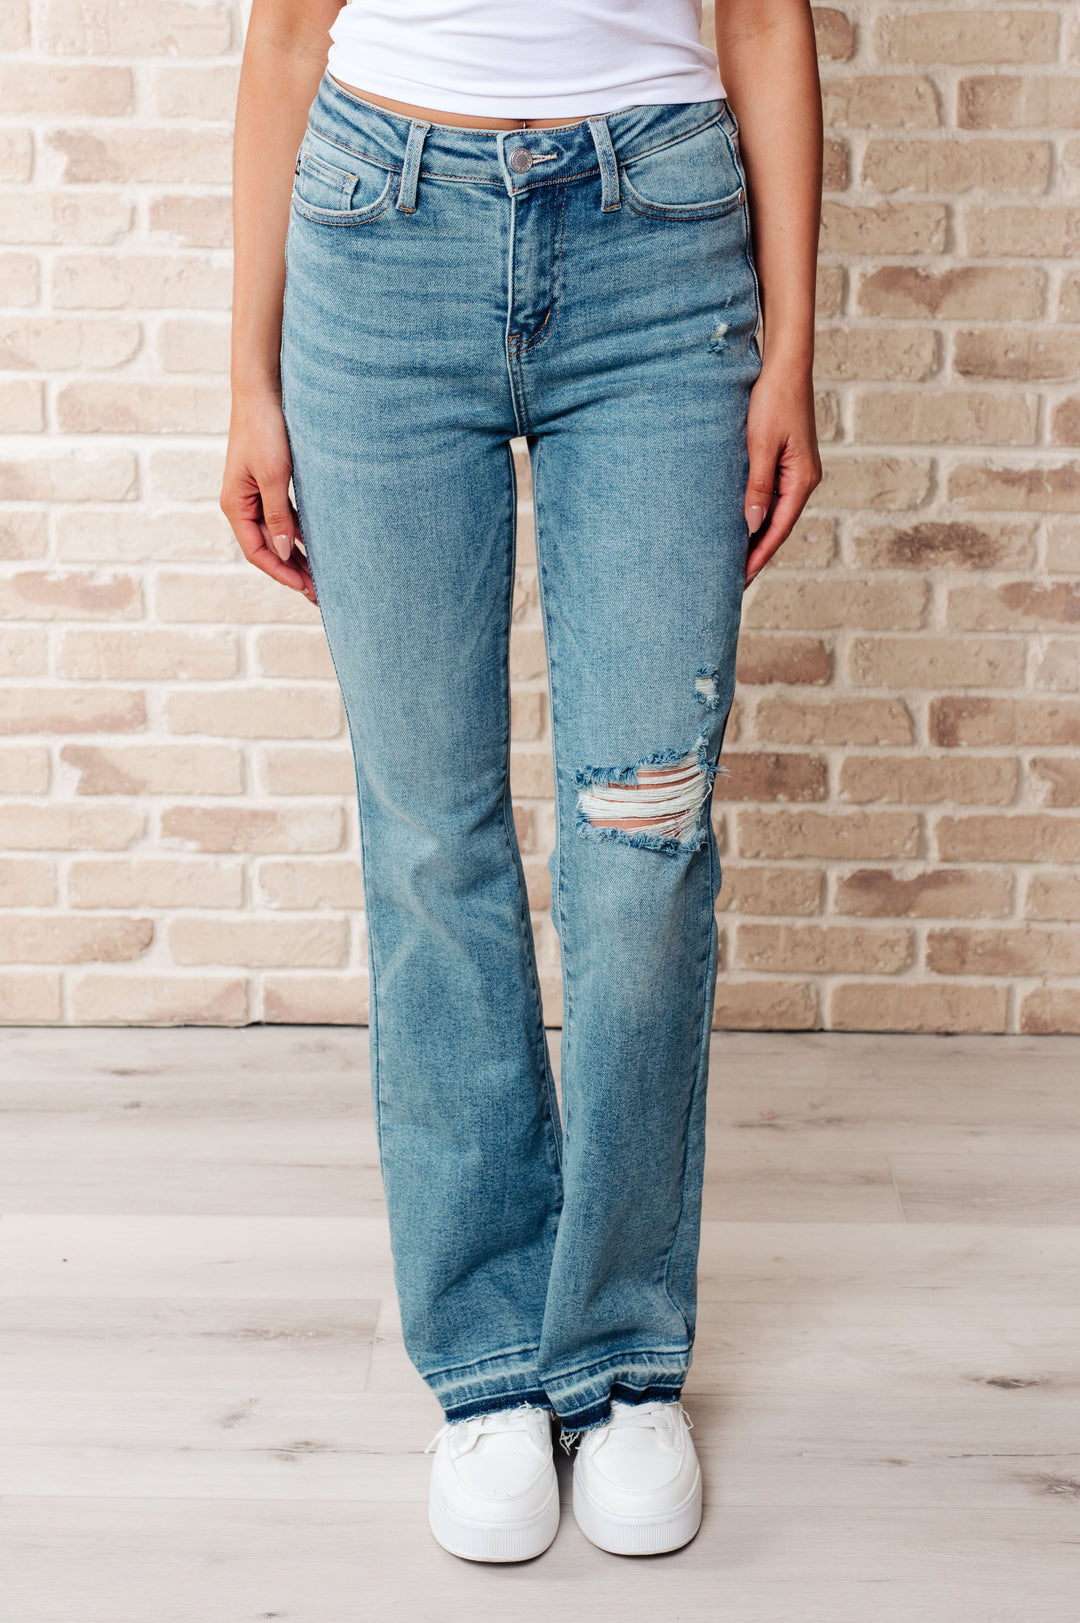 Isla Mid Rise Distressed Released Hem Bootcut Jeans-Denim-Inspired by Justeen-Women's Clothing Boutique